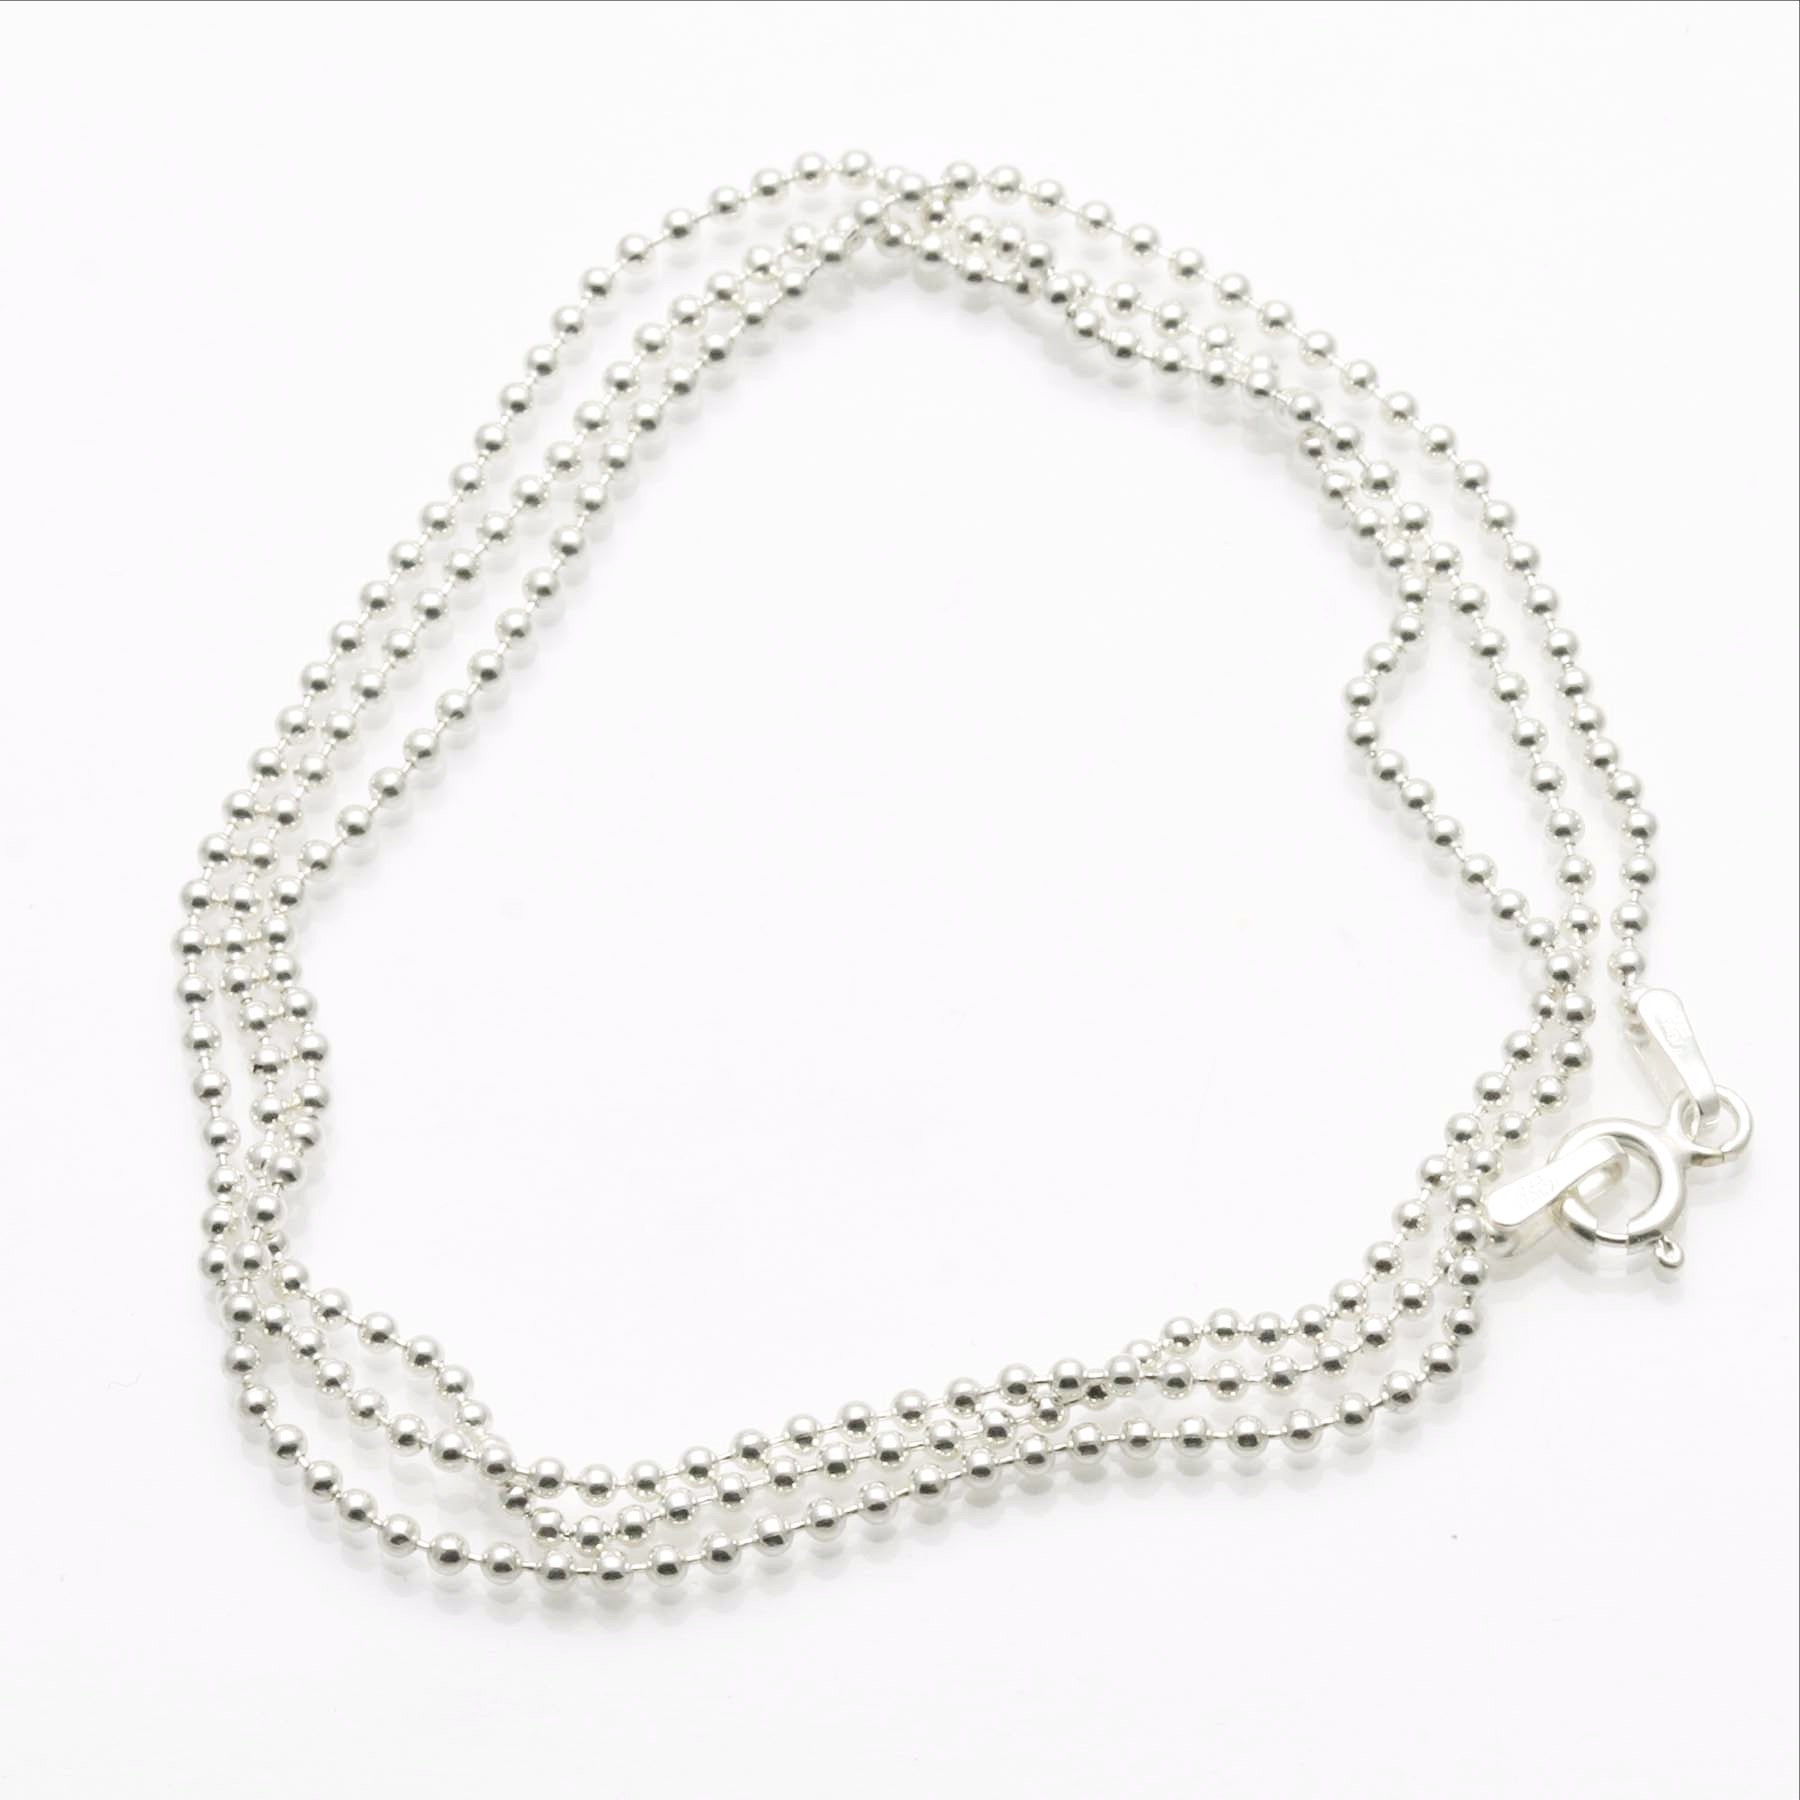 Sterling Silver Ball Bead Chain - JewelryJudaica